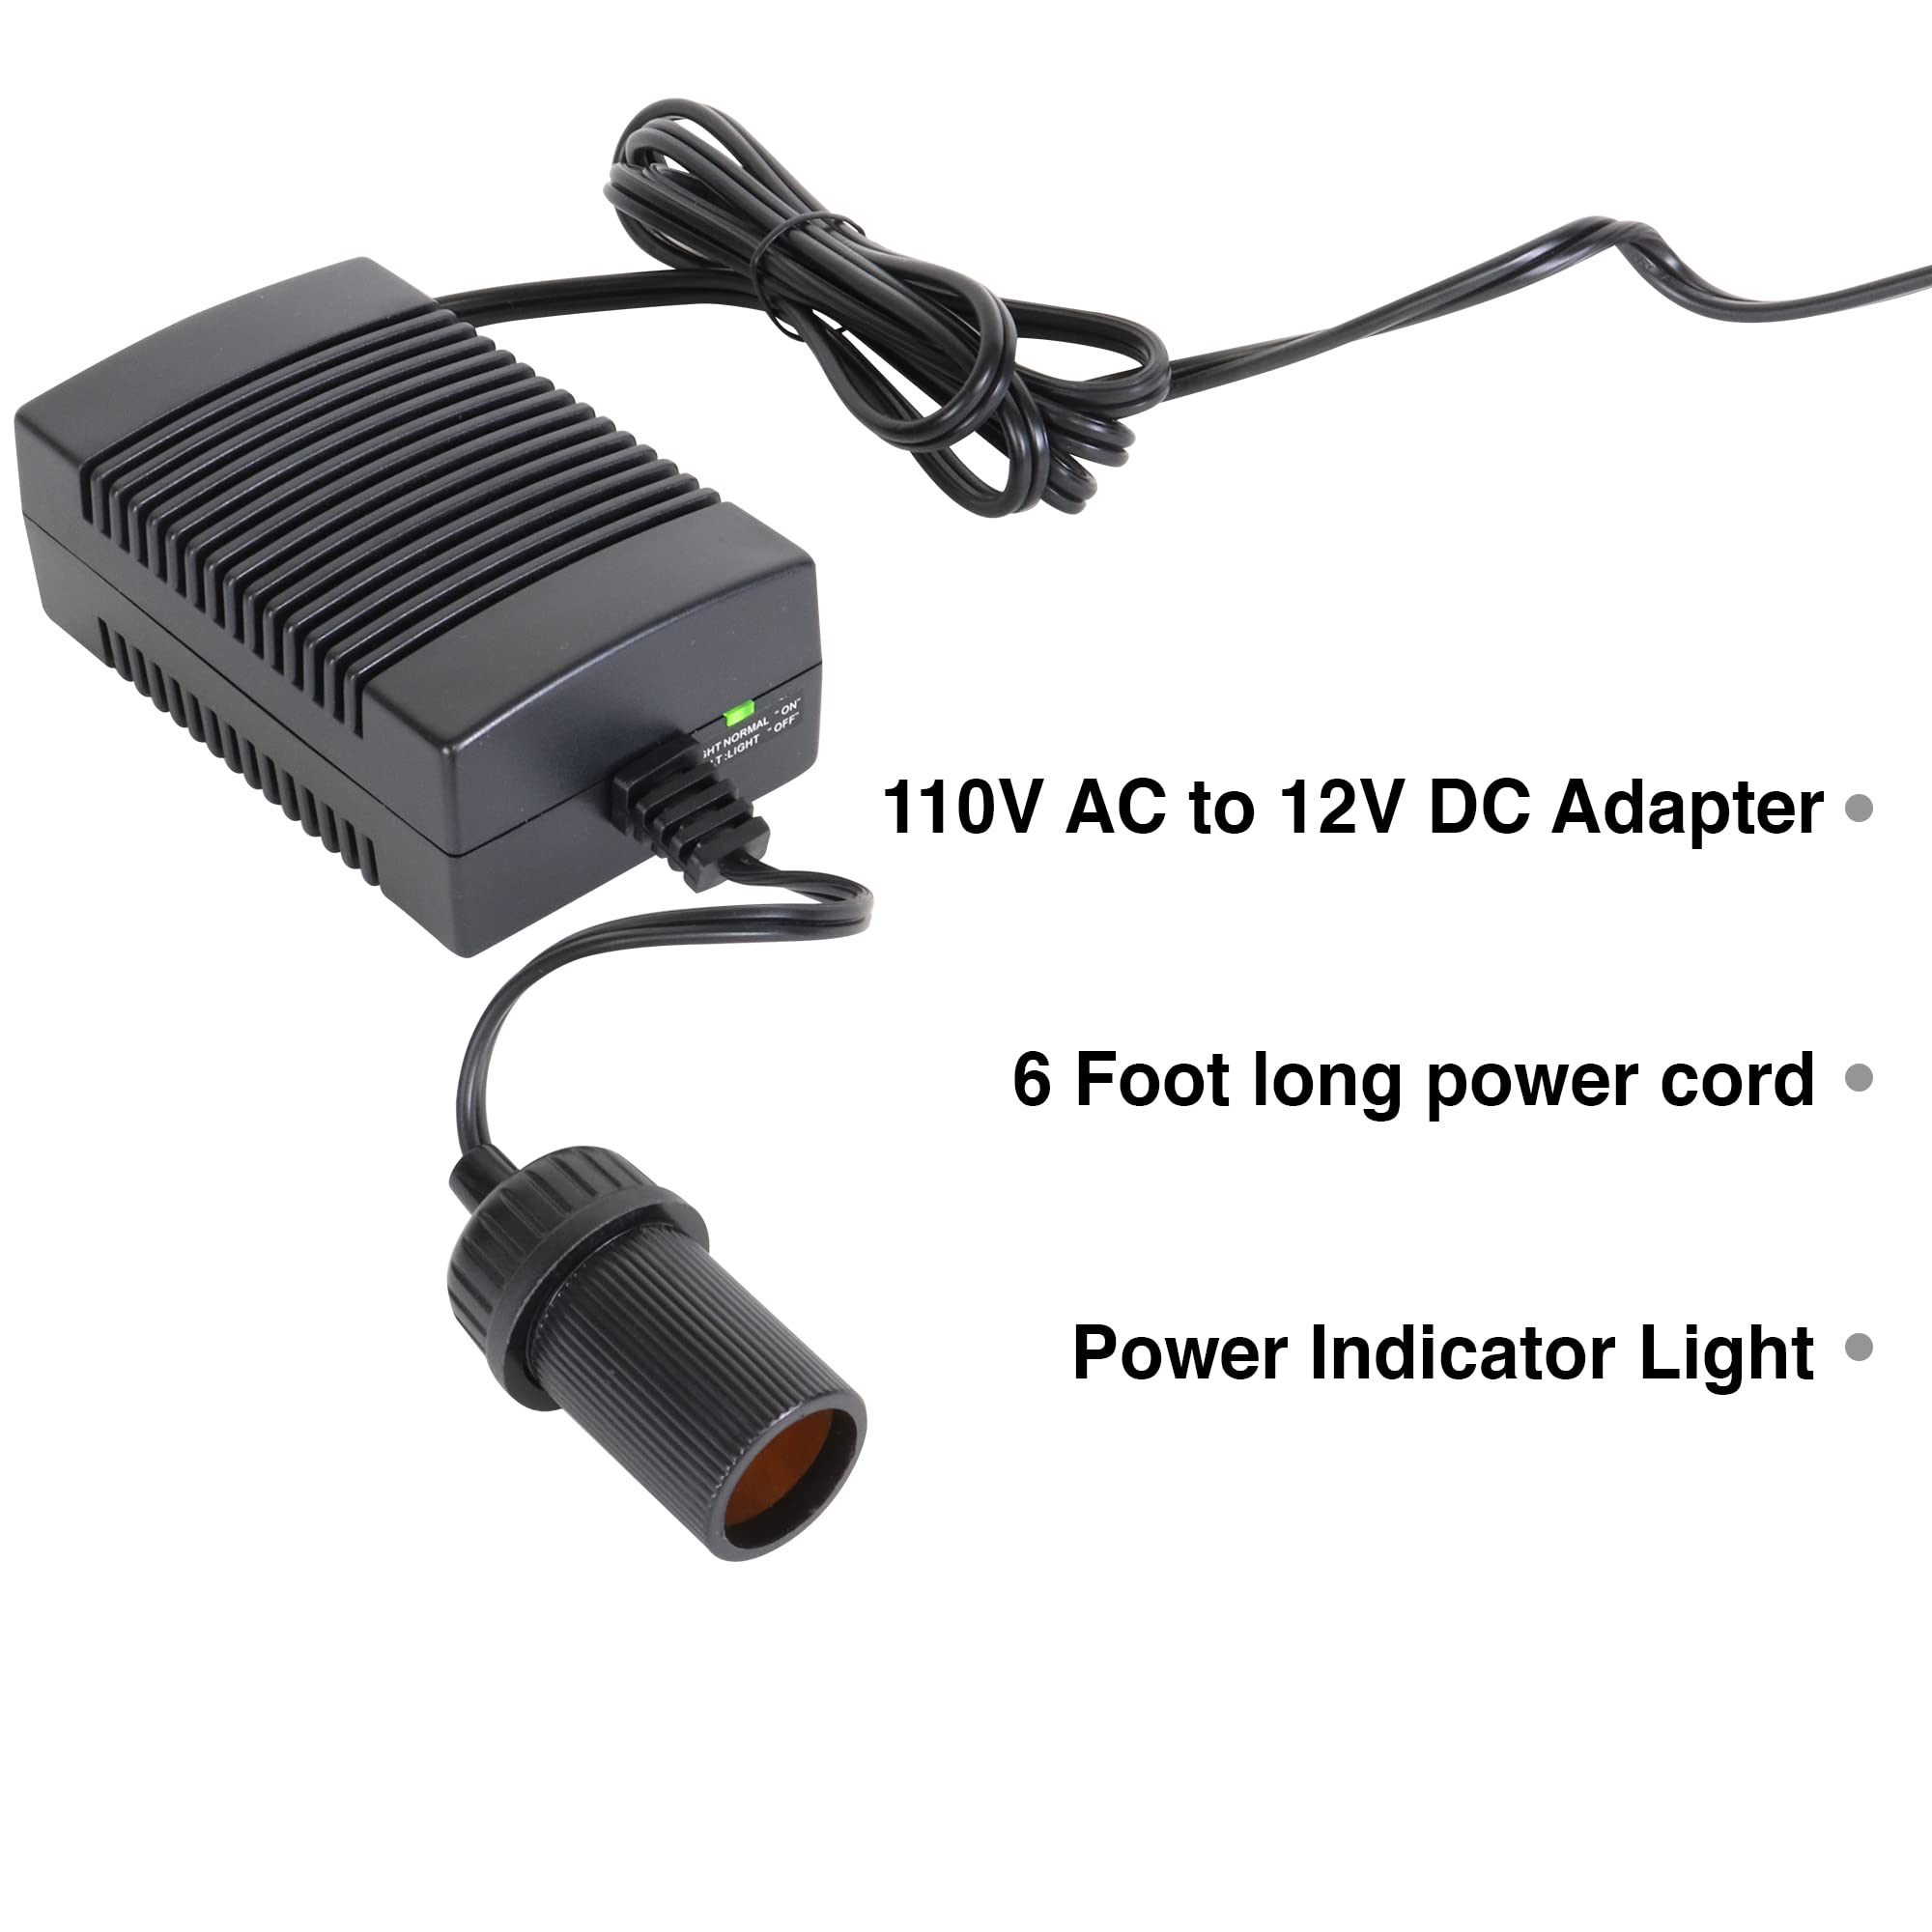 Koolatron 110V AC to 12V DC Power Adapter with Circuit Breaker, AC to DC Power Converter, 12V 5A DC Power Supply, Black, 6 Ft Cord for 12V Portable Devices, Compressor, Cooler, Car Fridge, and More